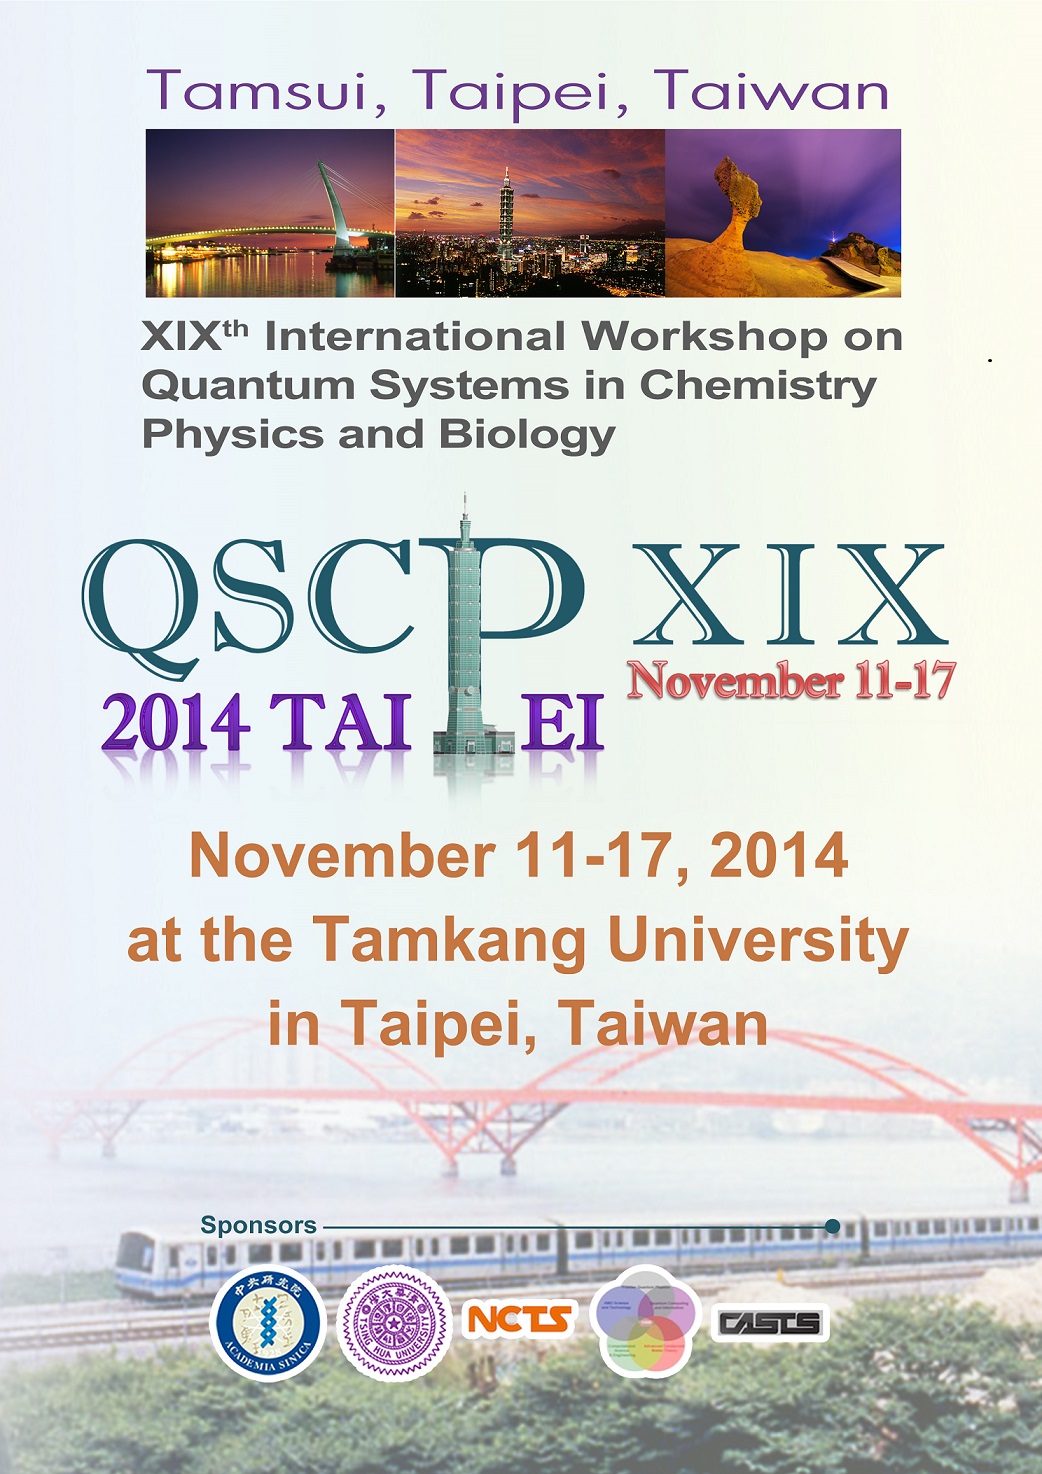 XIXth International Workshop on Quantum Systems in Chemistry, Physics and Biology